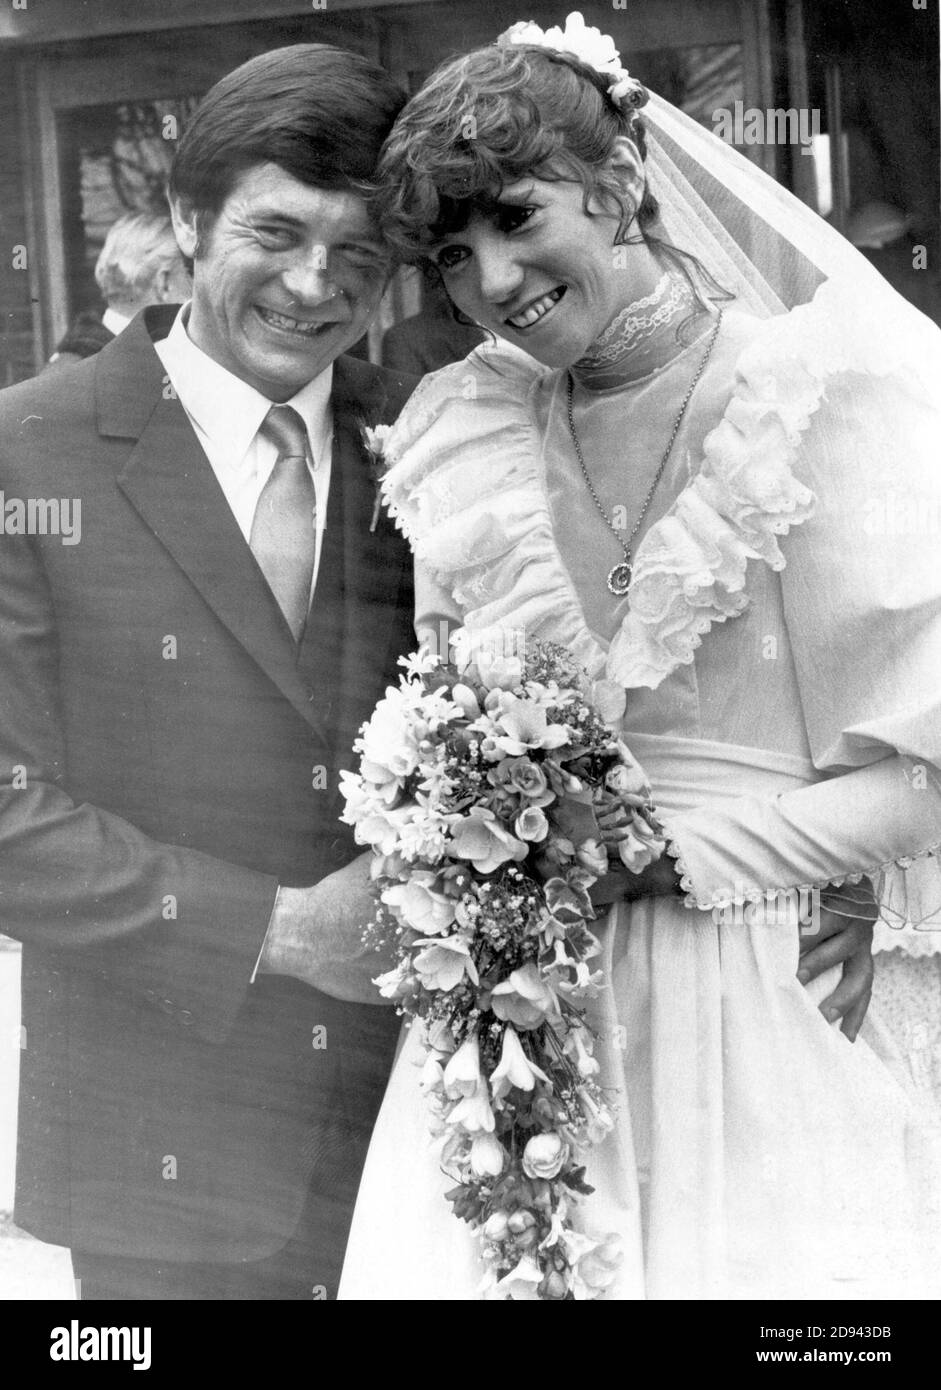 THE WEDDING OF RACING DRIVER DAVID PURLEY TO GAIL WARD 1981. PORTSMOUTH. Stock Photo